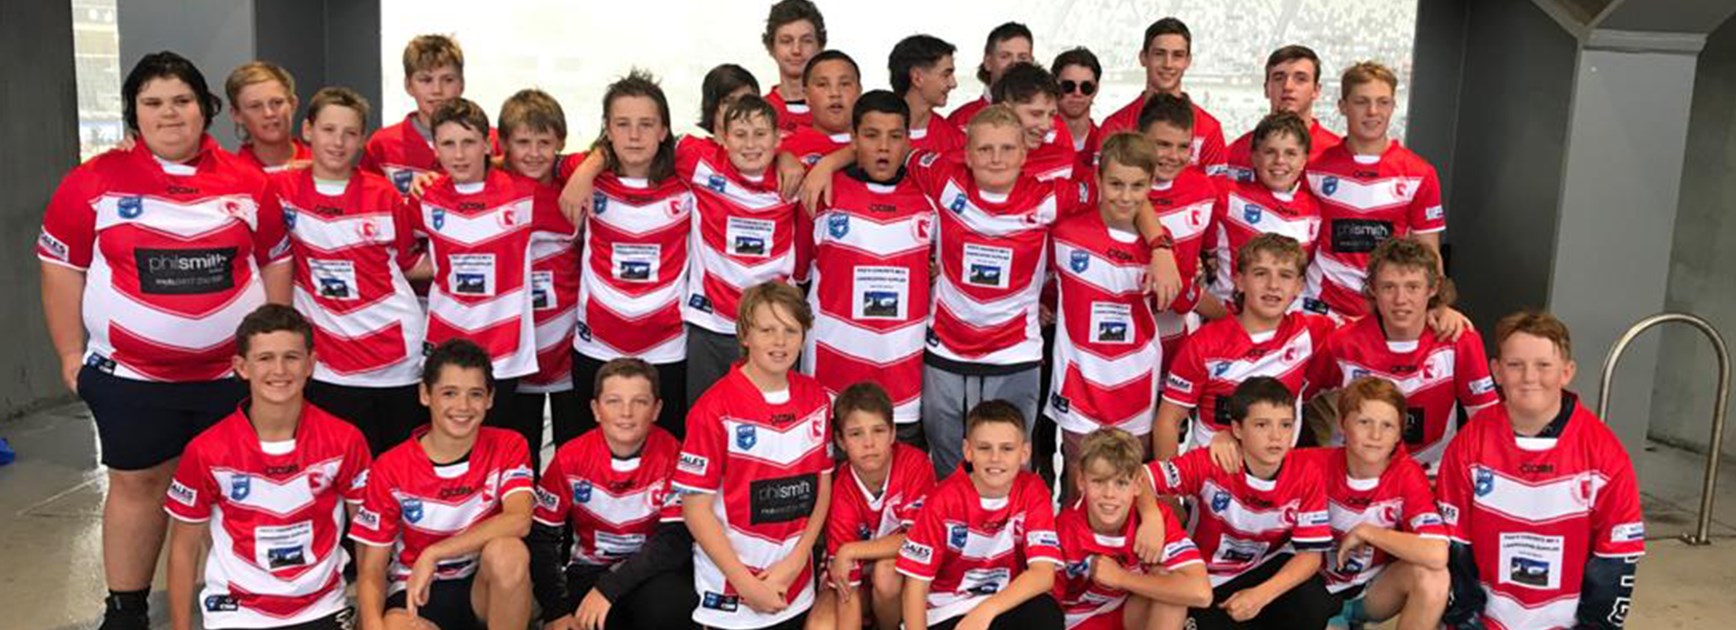 Temora supports former players at the Bulldogs